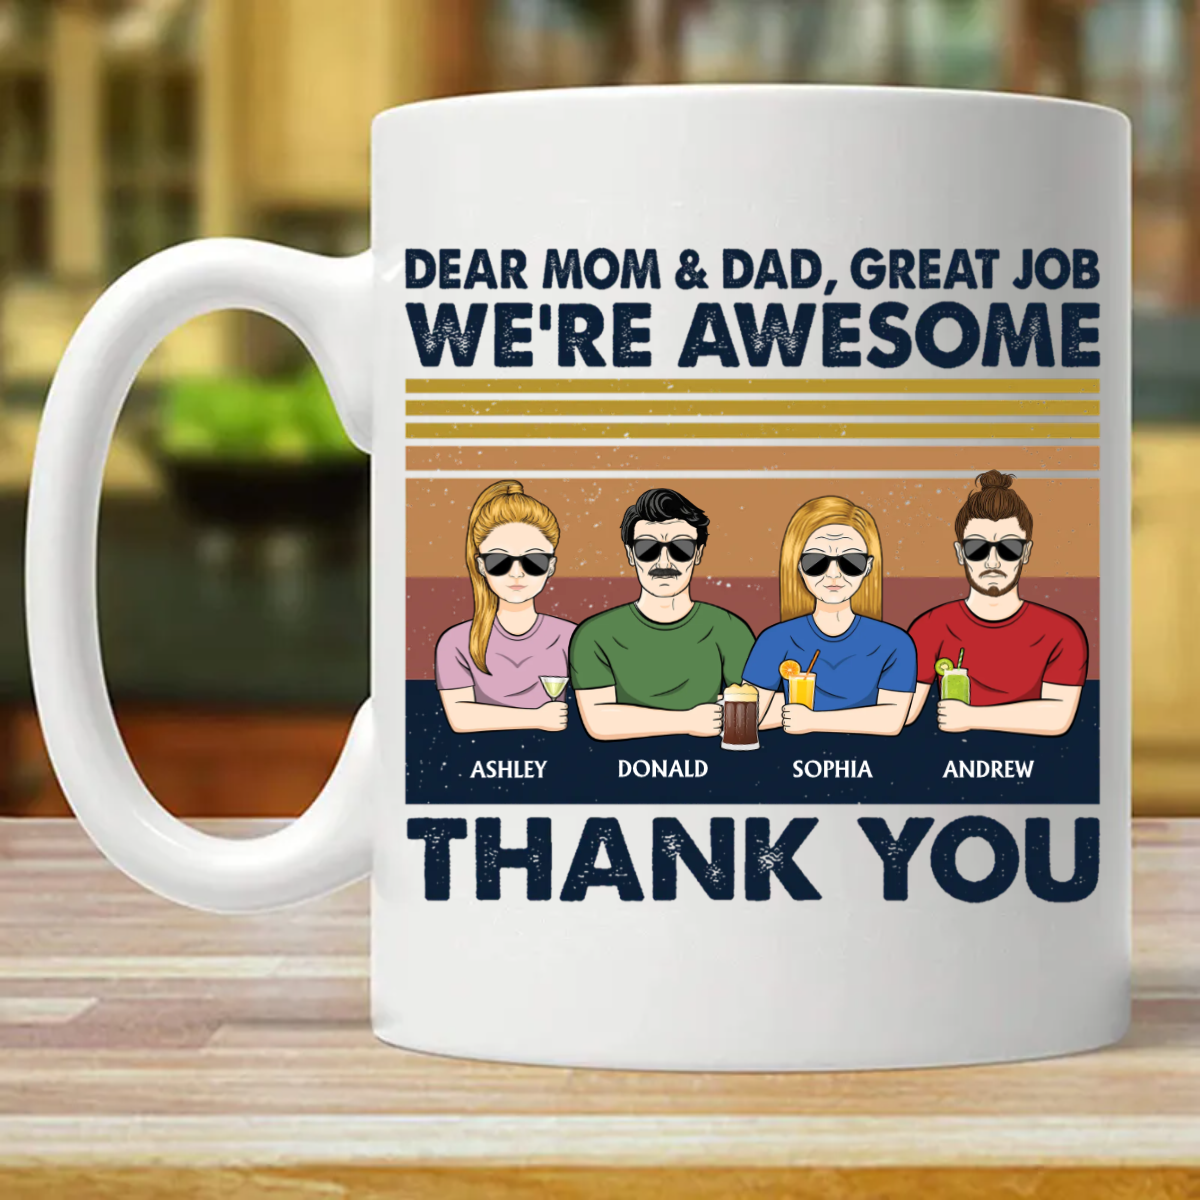 Dear Dad And Mom Great Job I'm Awesome Thank You - Father Gift - Personalized Custom Mug (Double-sided Printing)